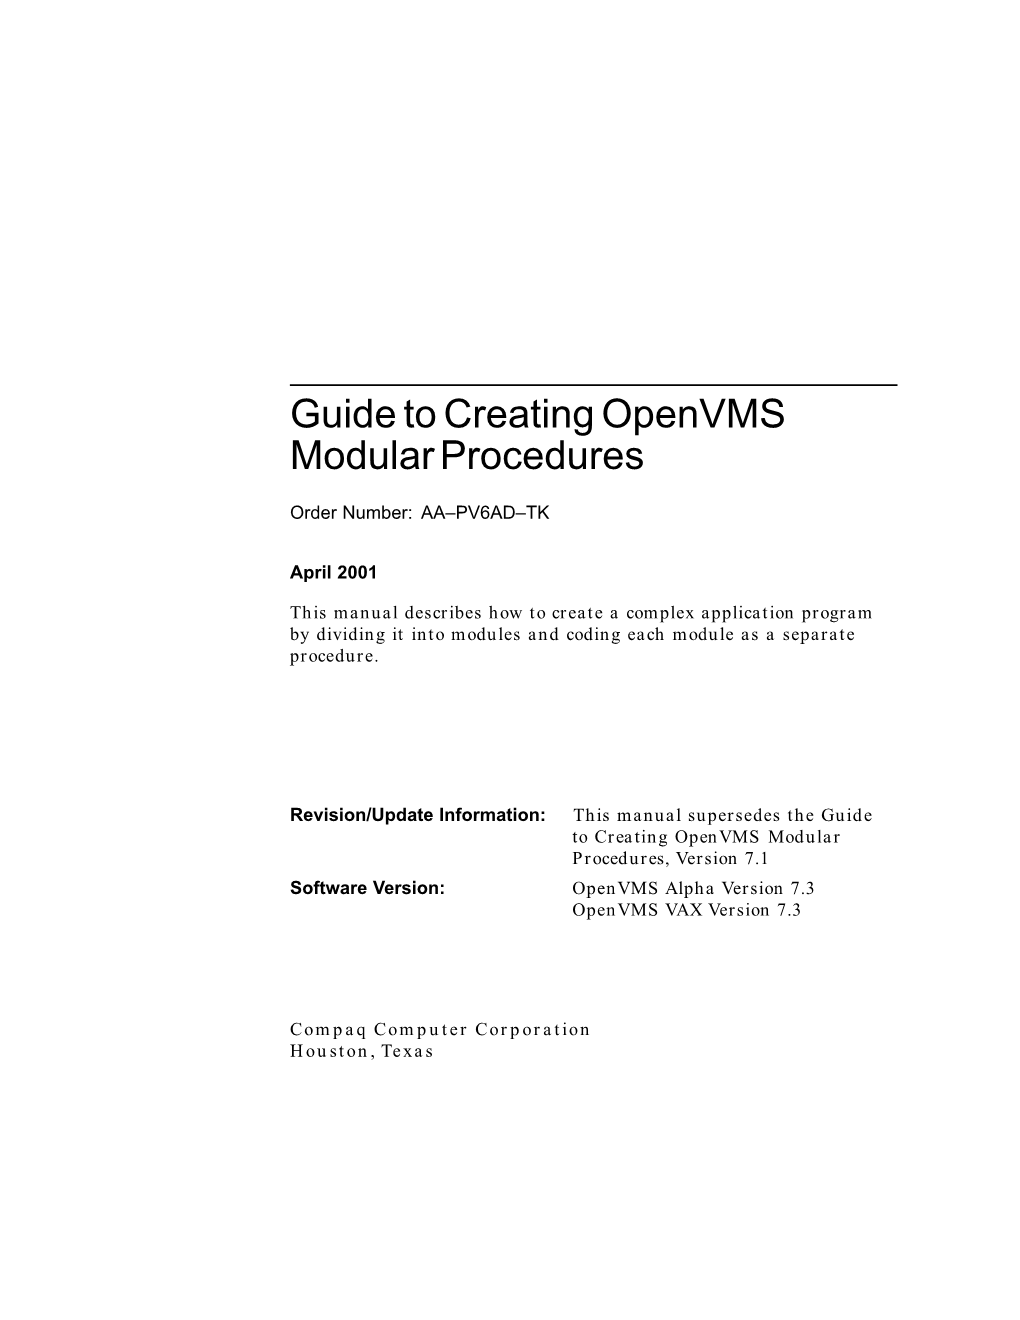 Guide to Creating Openvms Modular Procedures